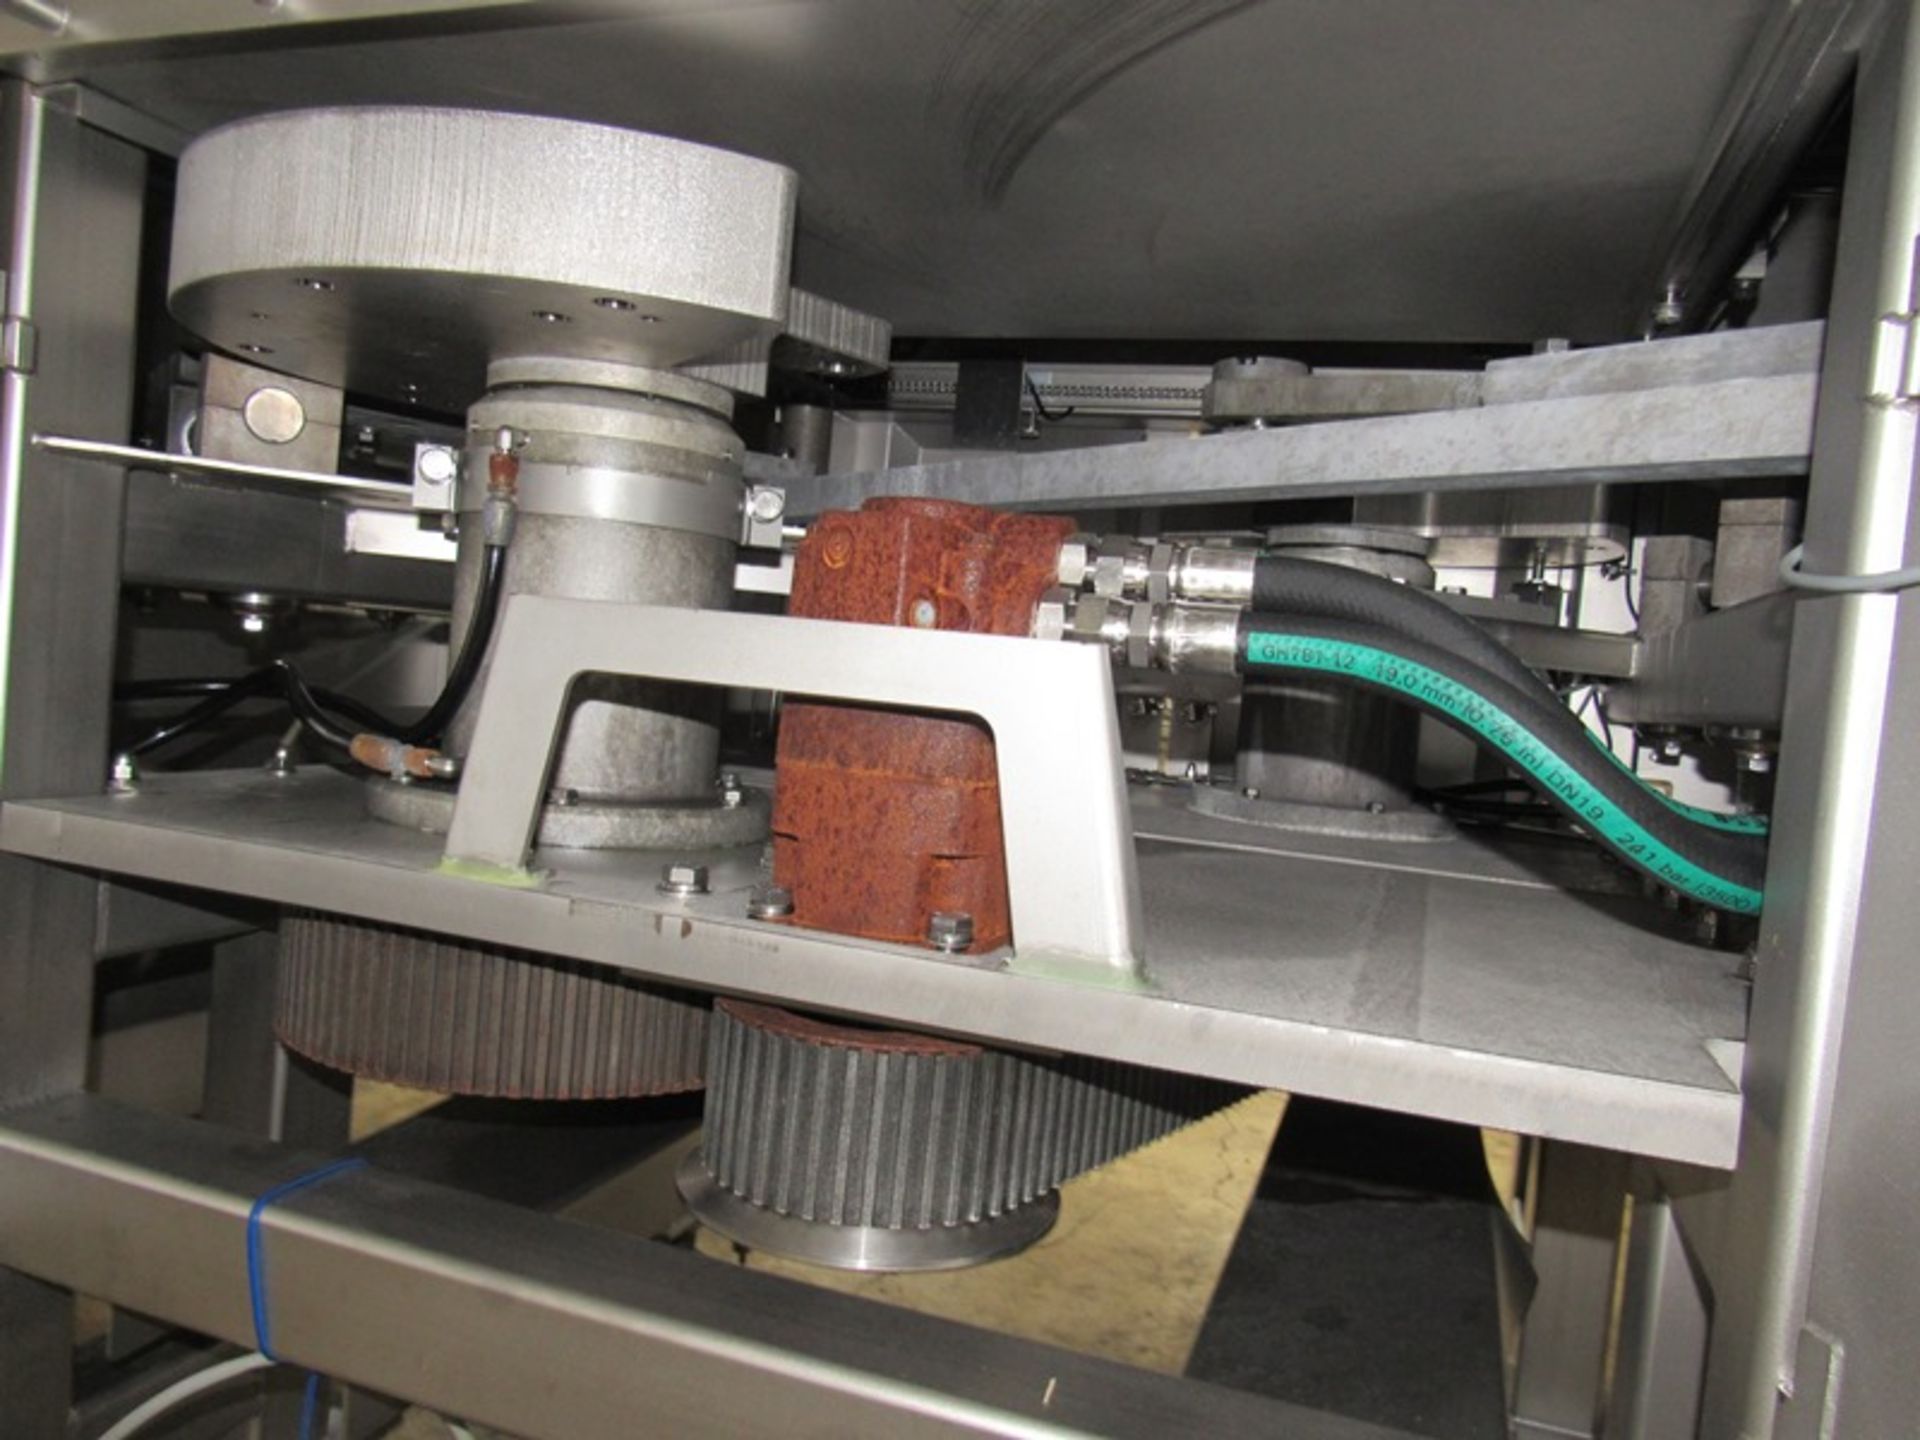 Ross Mdl. 990A Portion Slicer, Mfg. 2020, approx. new cost $288,000, (16) 3" dia. product feed tubes - Image 19 of 20